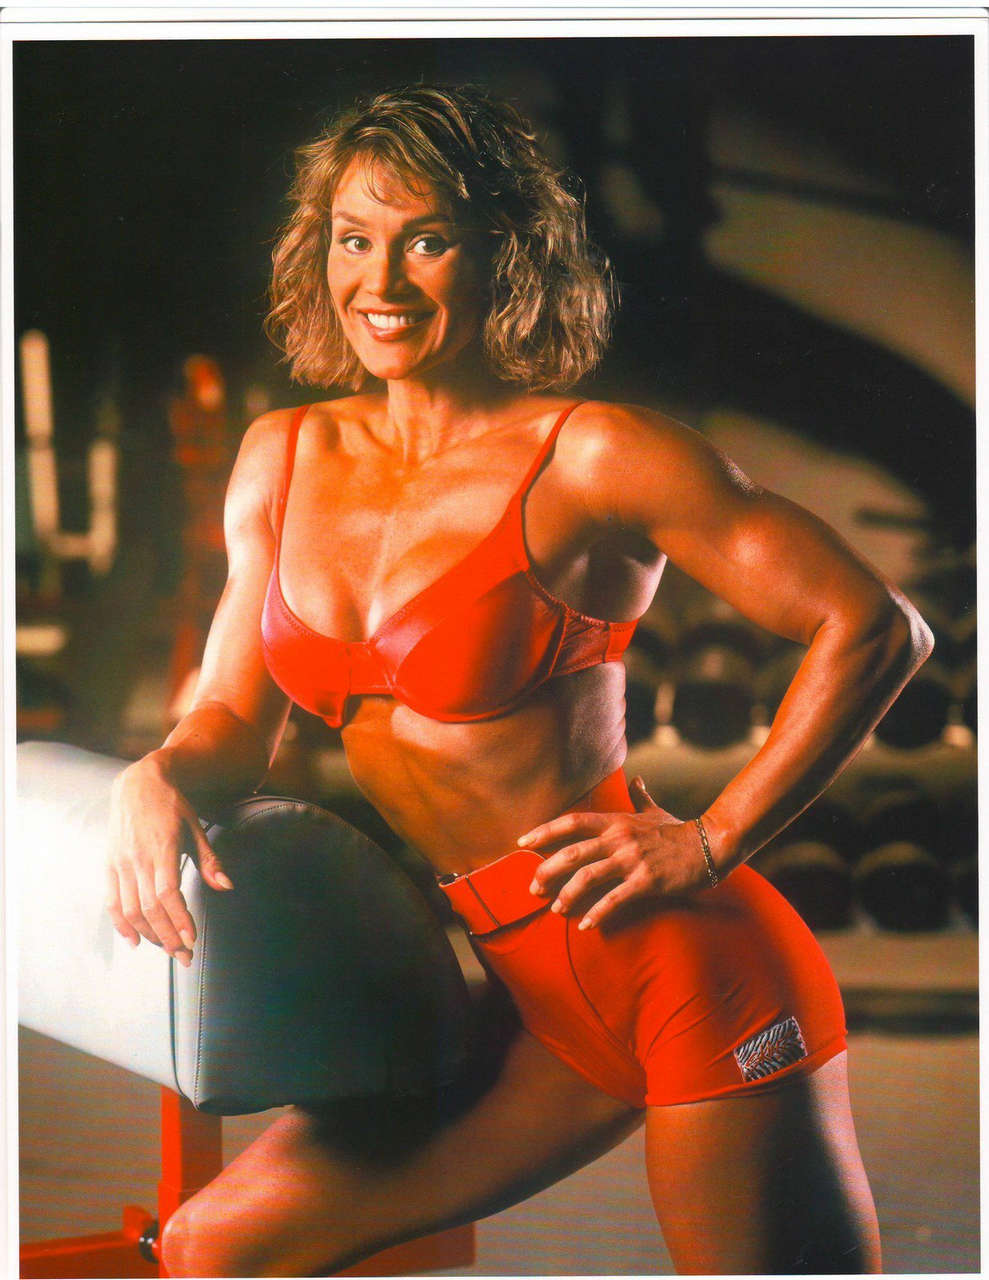 Cory Everson Muscles